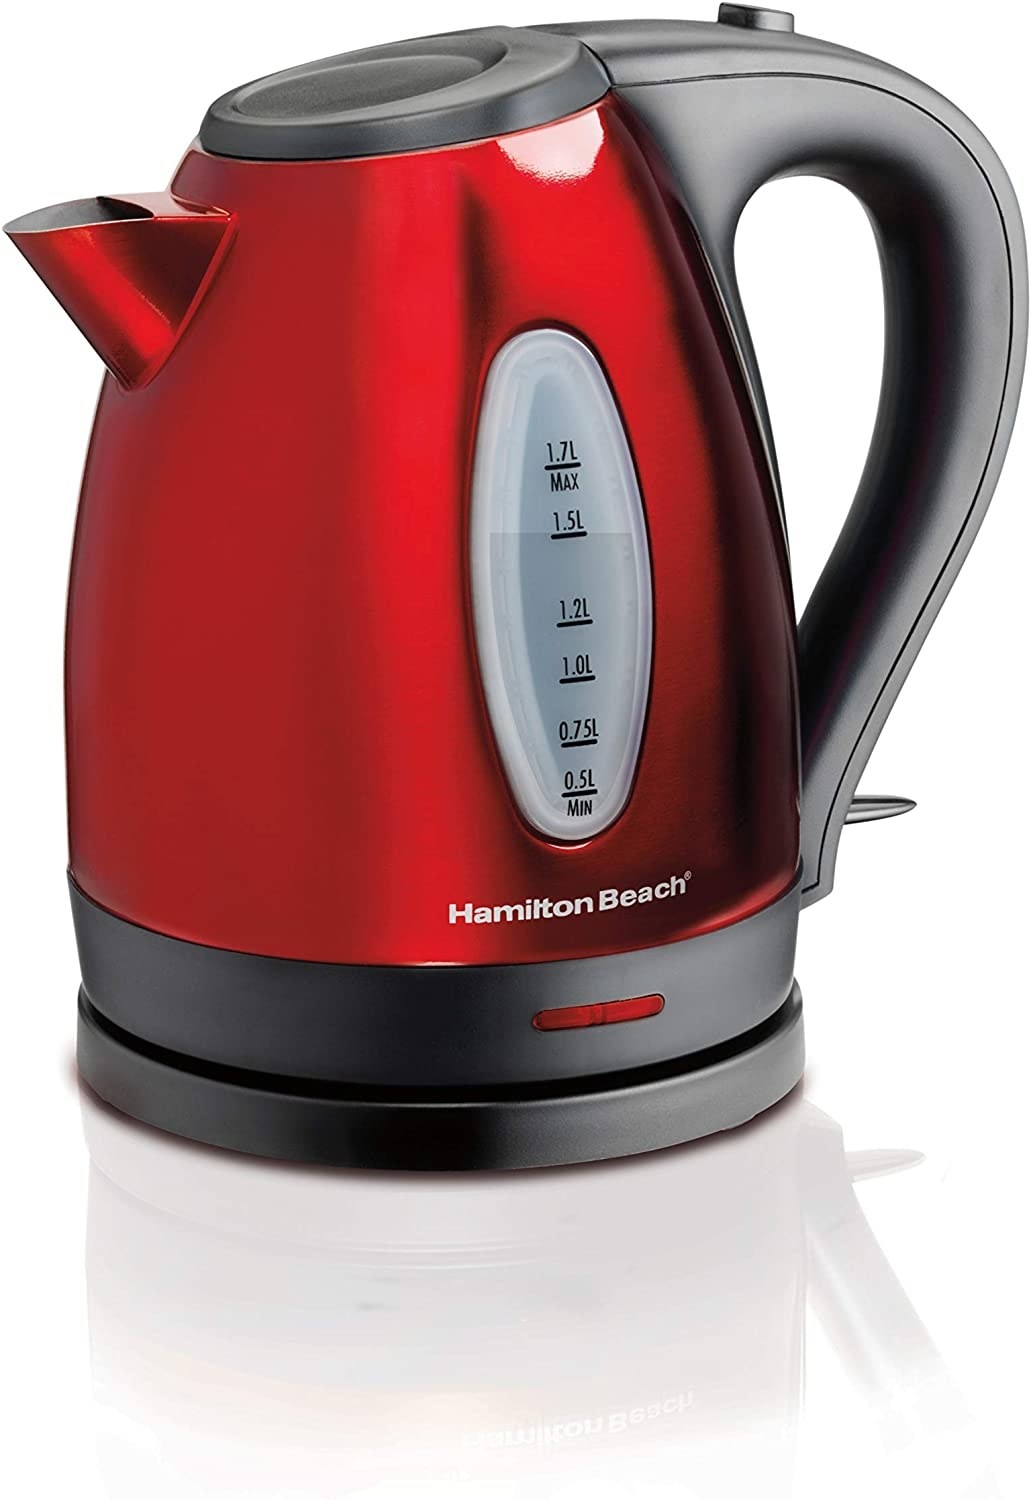 A bright red electric teak kettle with a black base and handle and a plastic measuring window